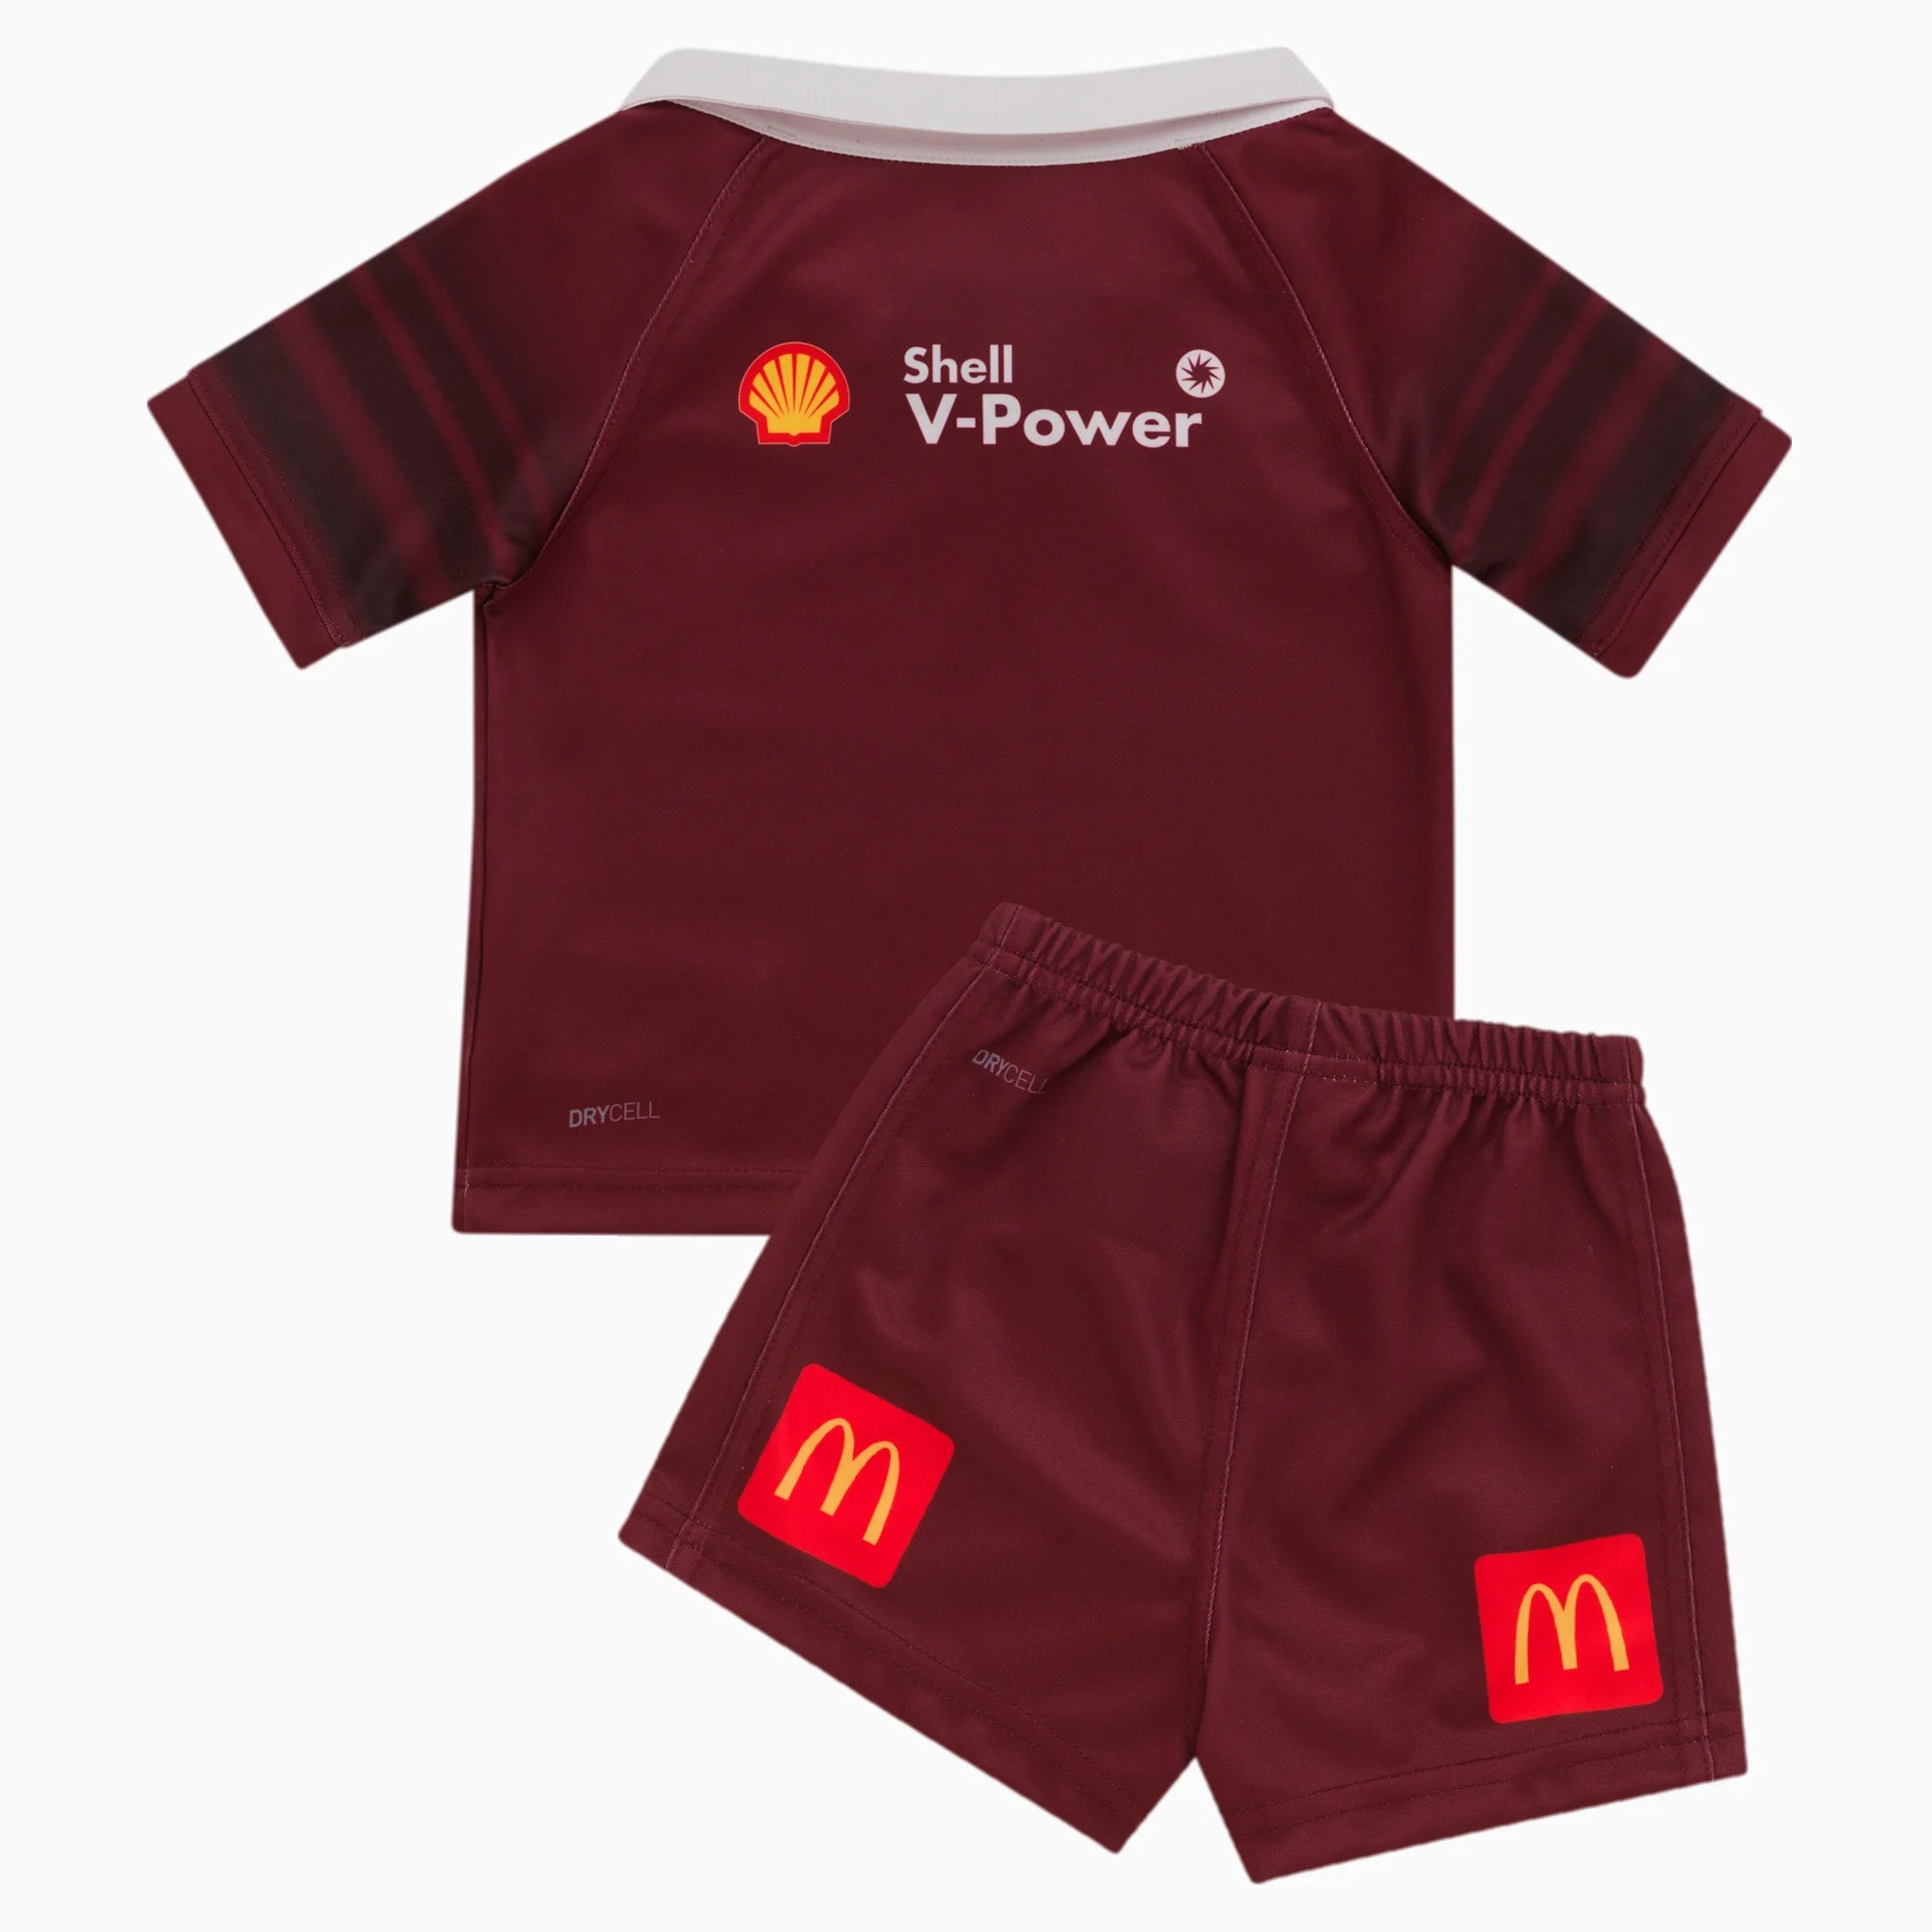 SOO QLD Infants Jersey 23 - The Rugby Shop Darwin